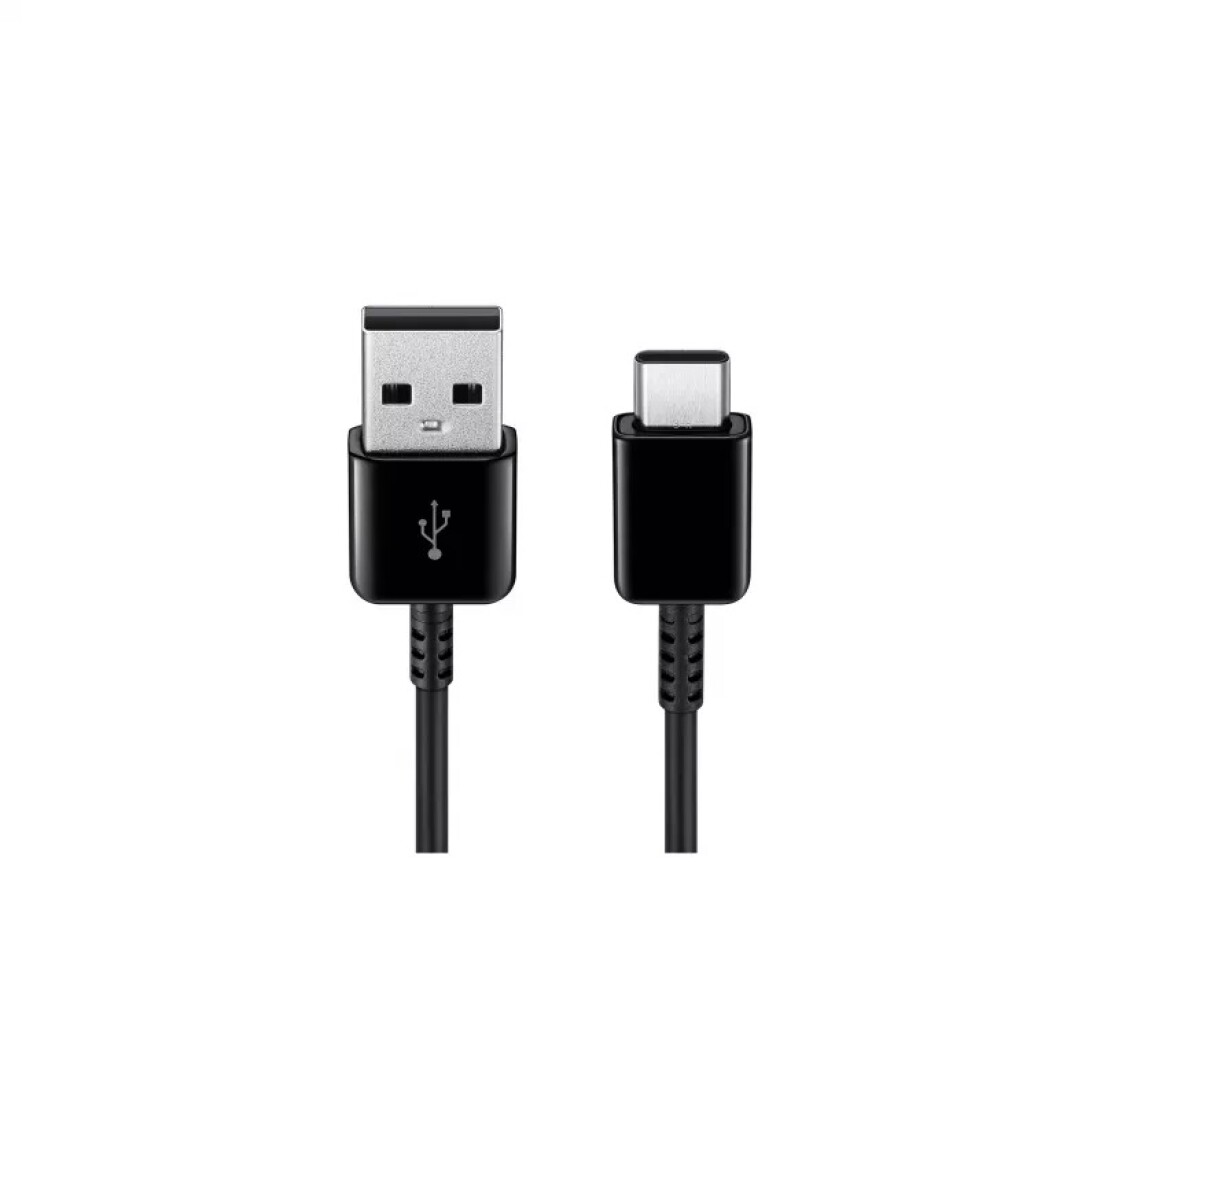 Cable USB Tipo C - Negro 